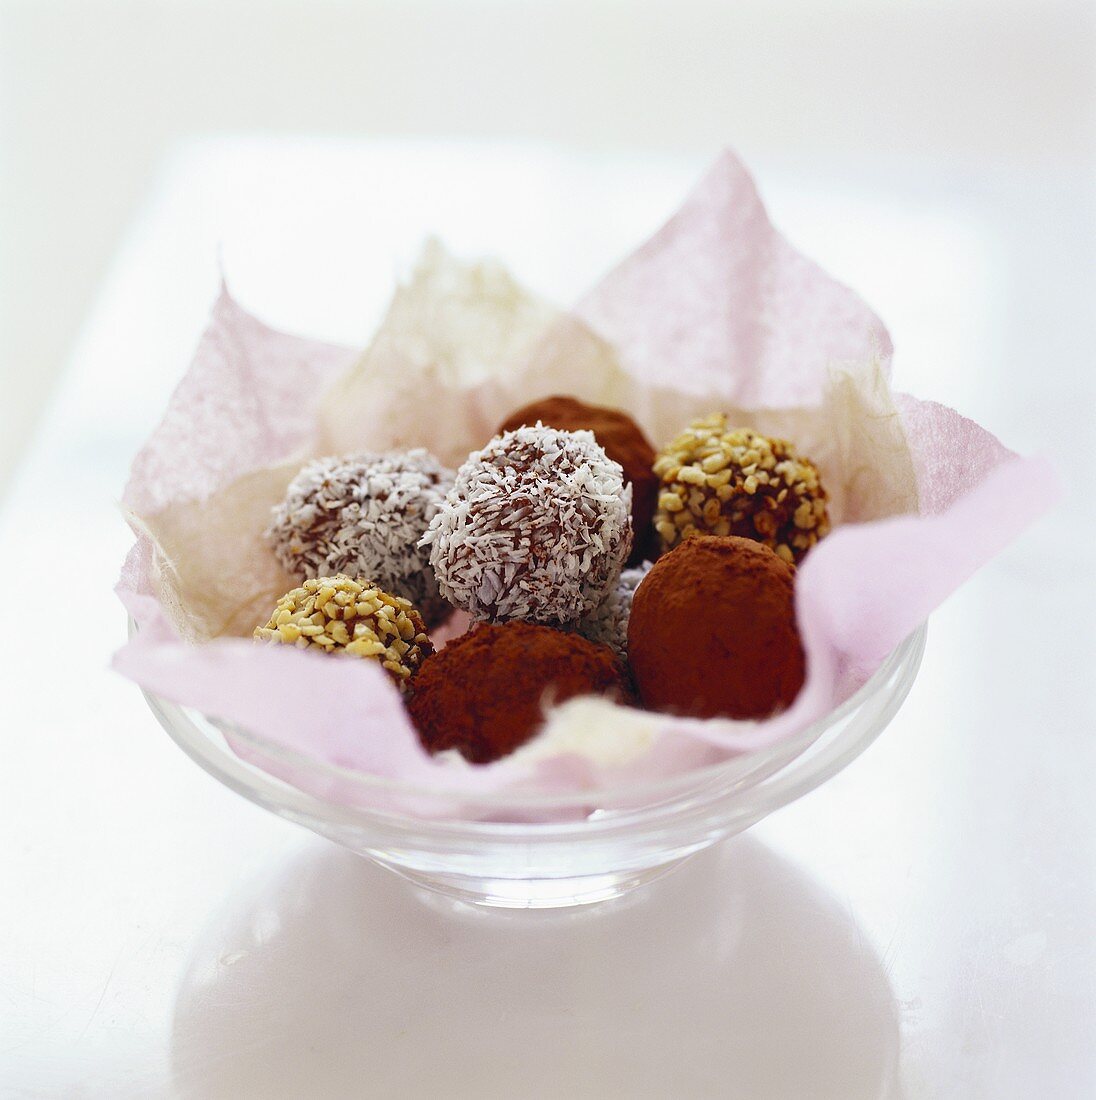 Several chocolate truffles in a small bowl